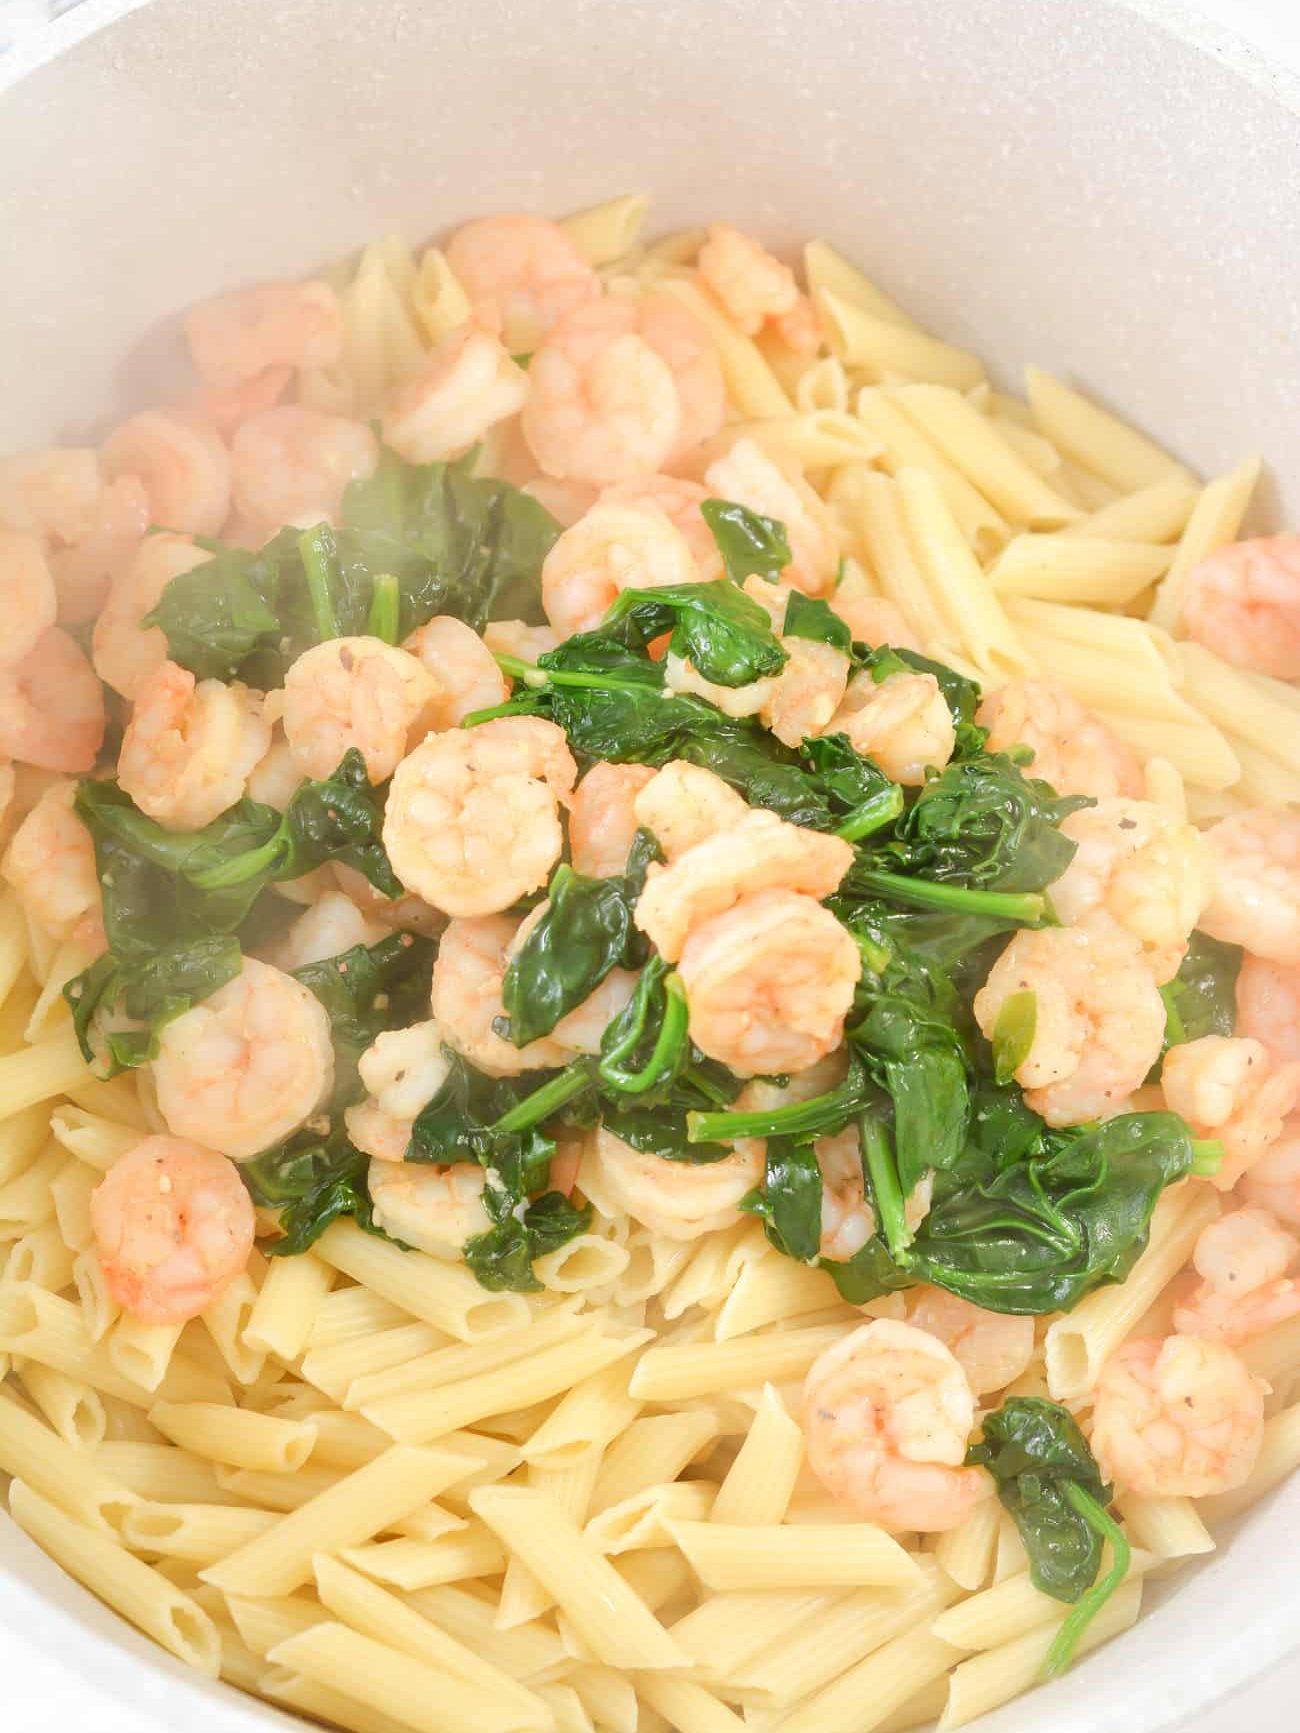 Pour the shrimp into a pot or serving dish with the pasta.